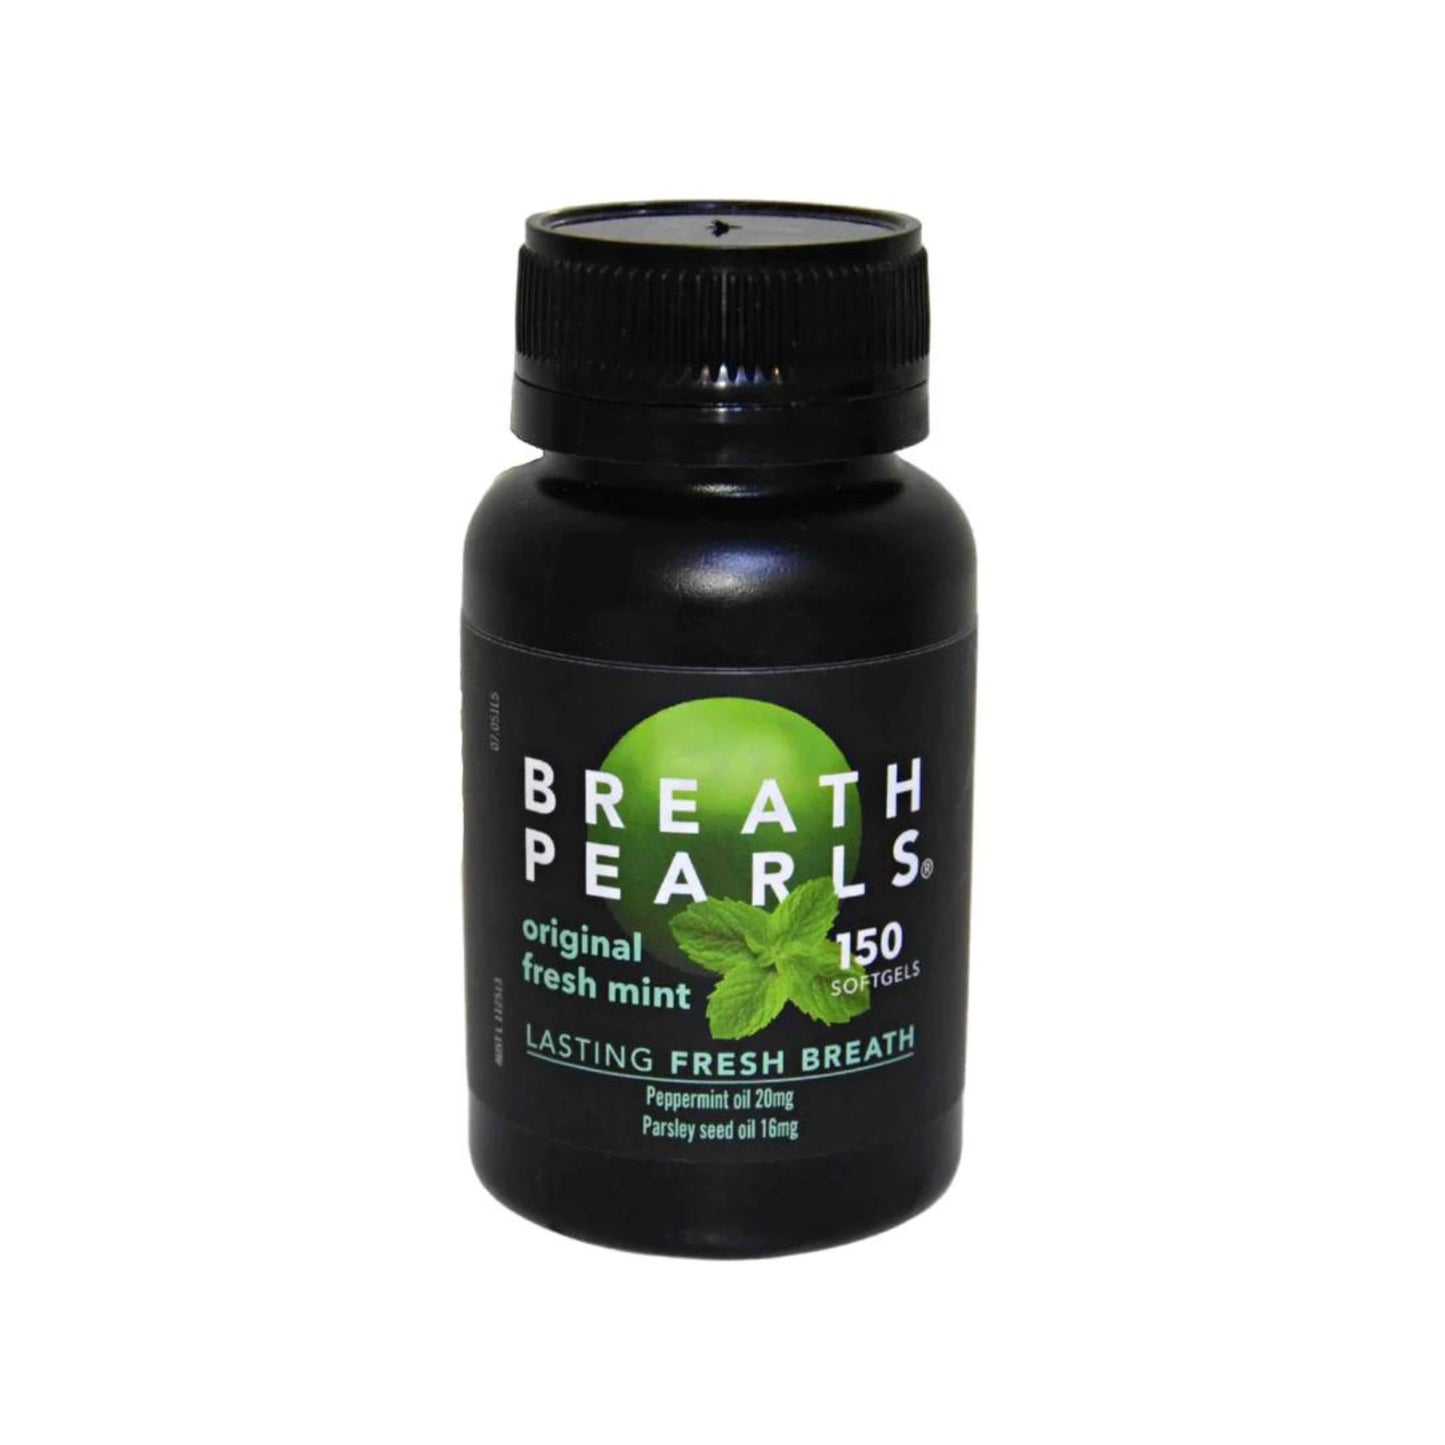 Breath Pearls Natural Capsules - 150 Count x 6 Pack